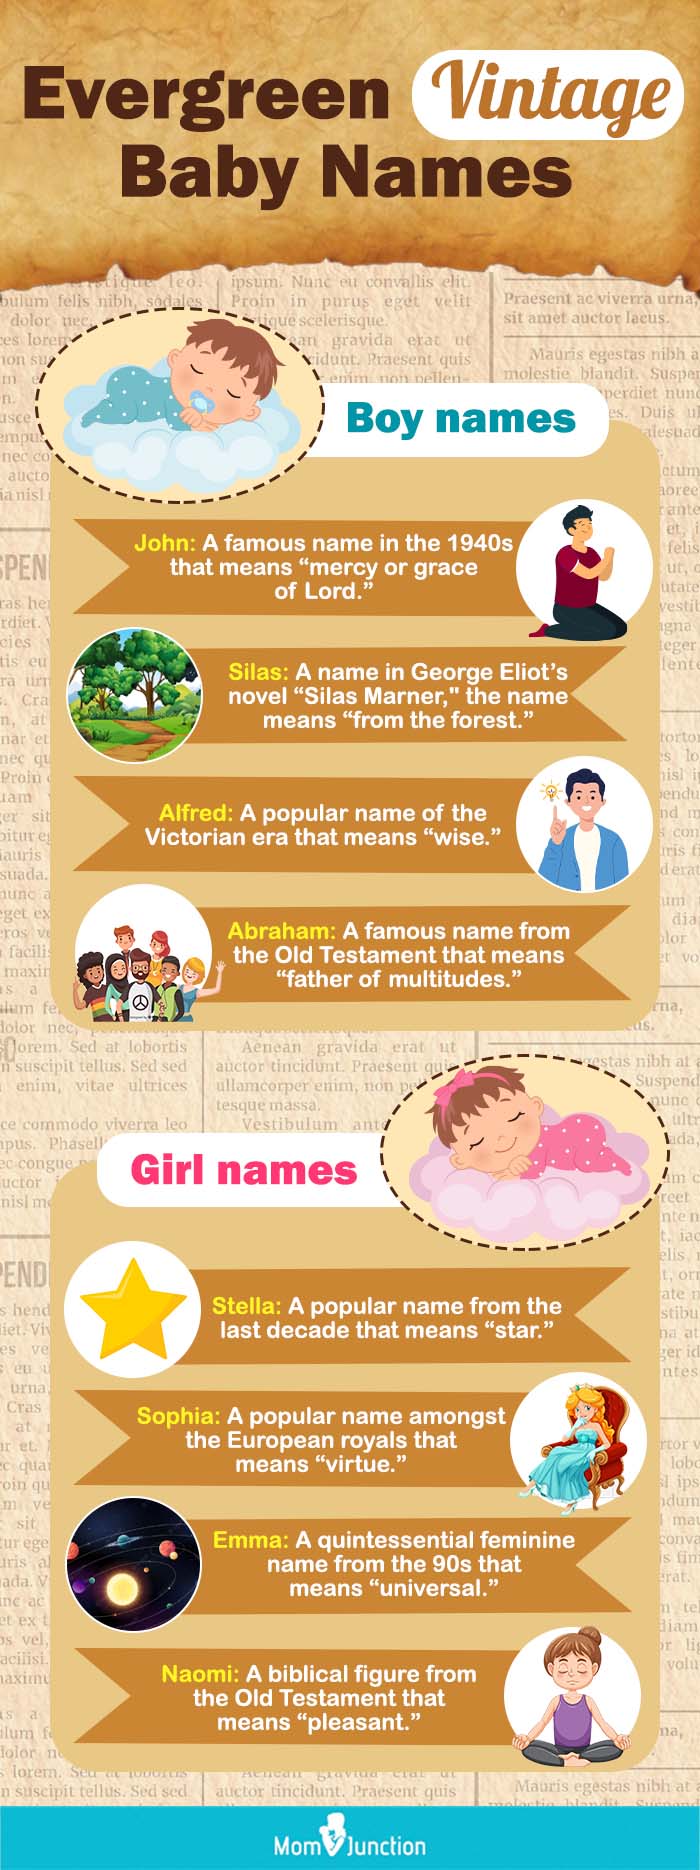 evergreen vintage baby names (infographic)